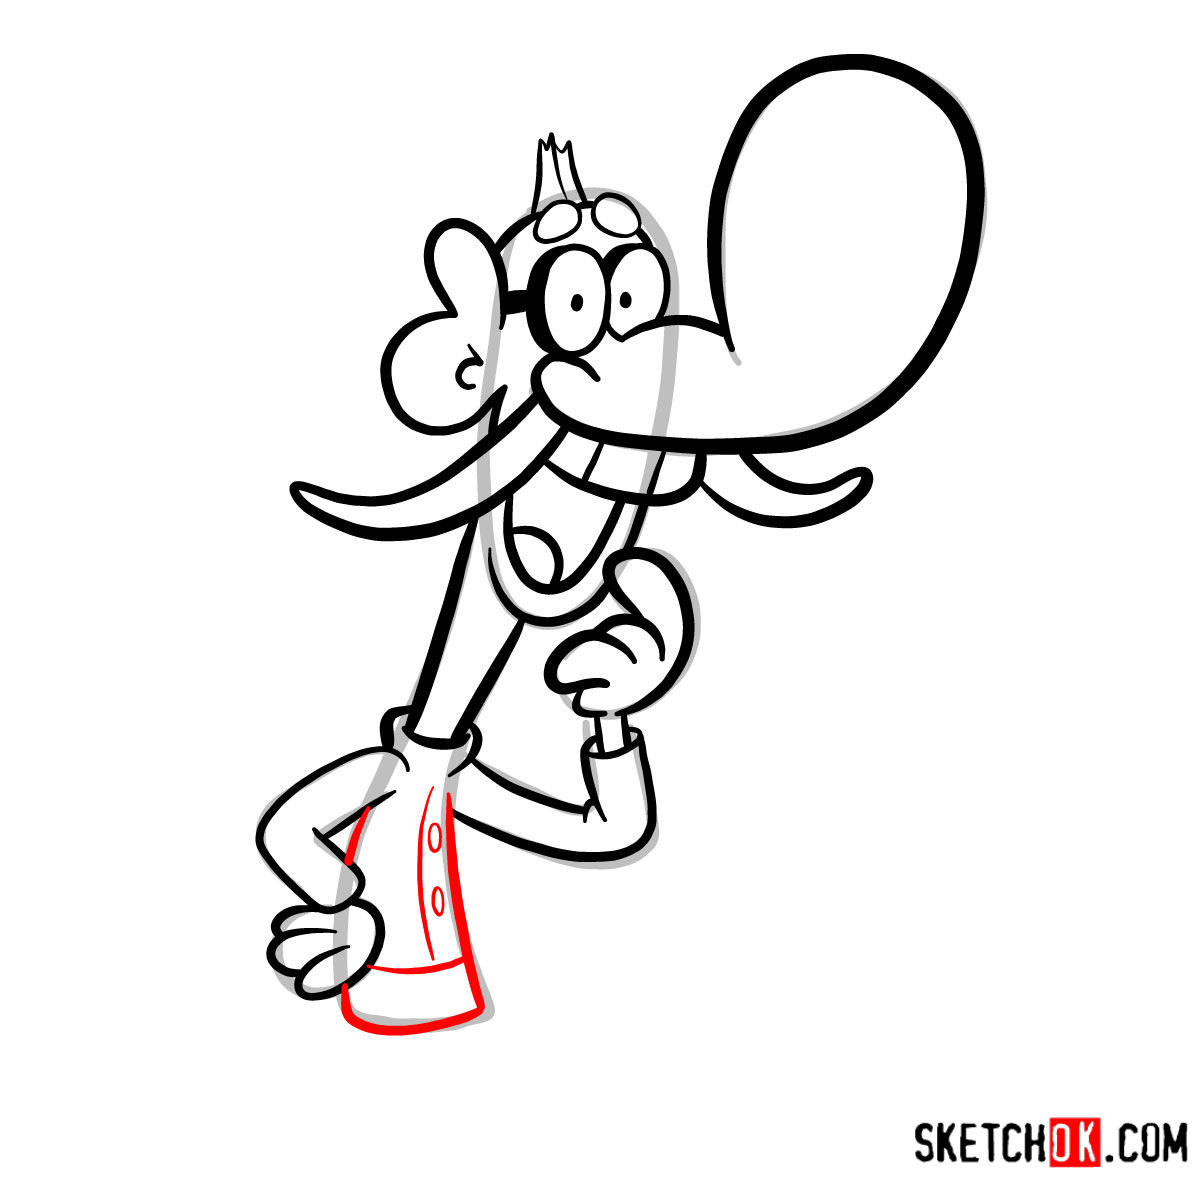 How to draw Mung Daal from Chowder series - step 09